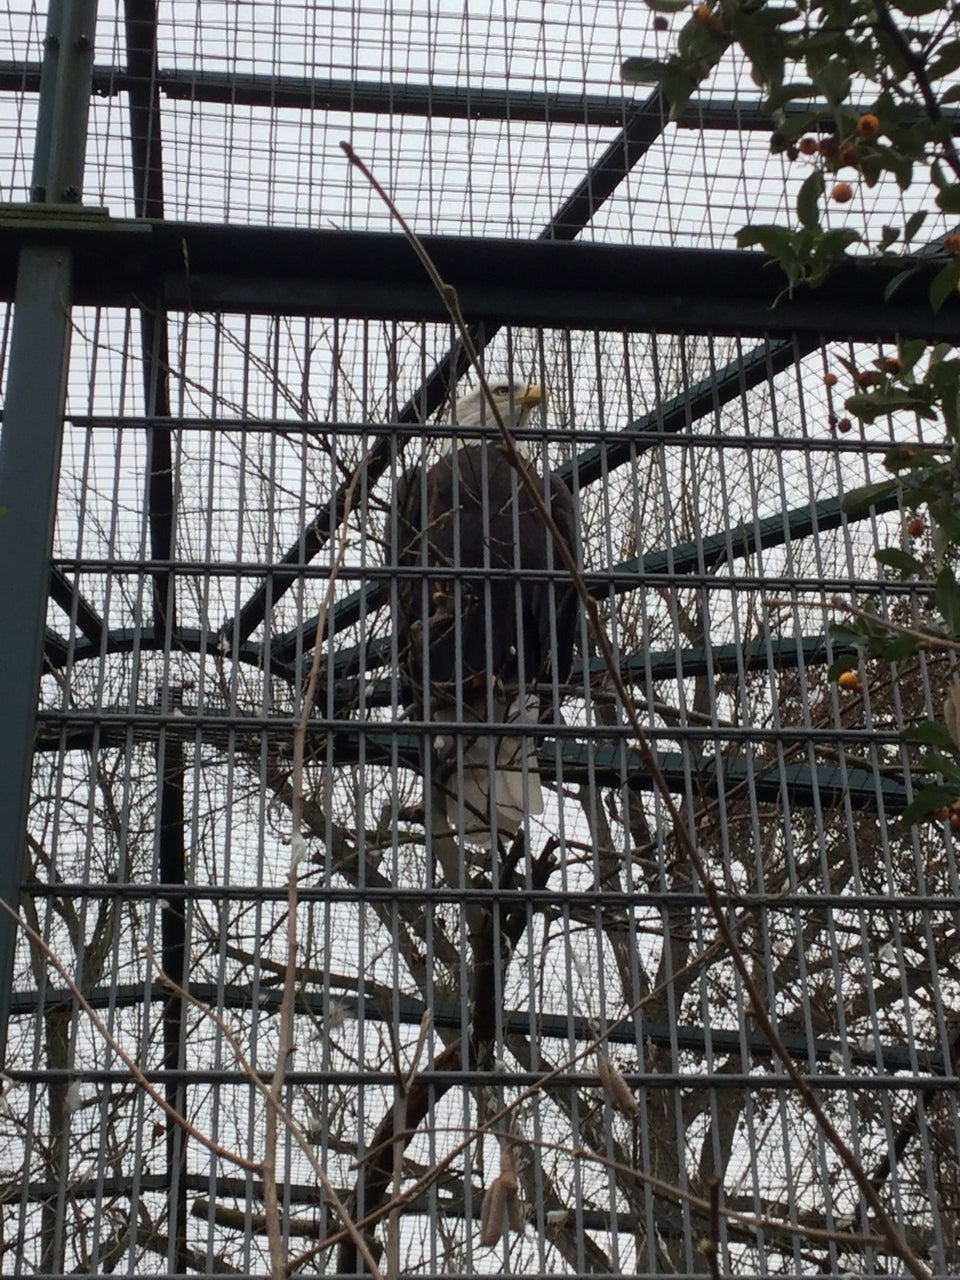 Bald eagle in a cage